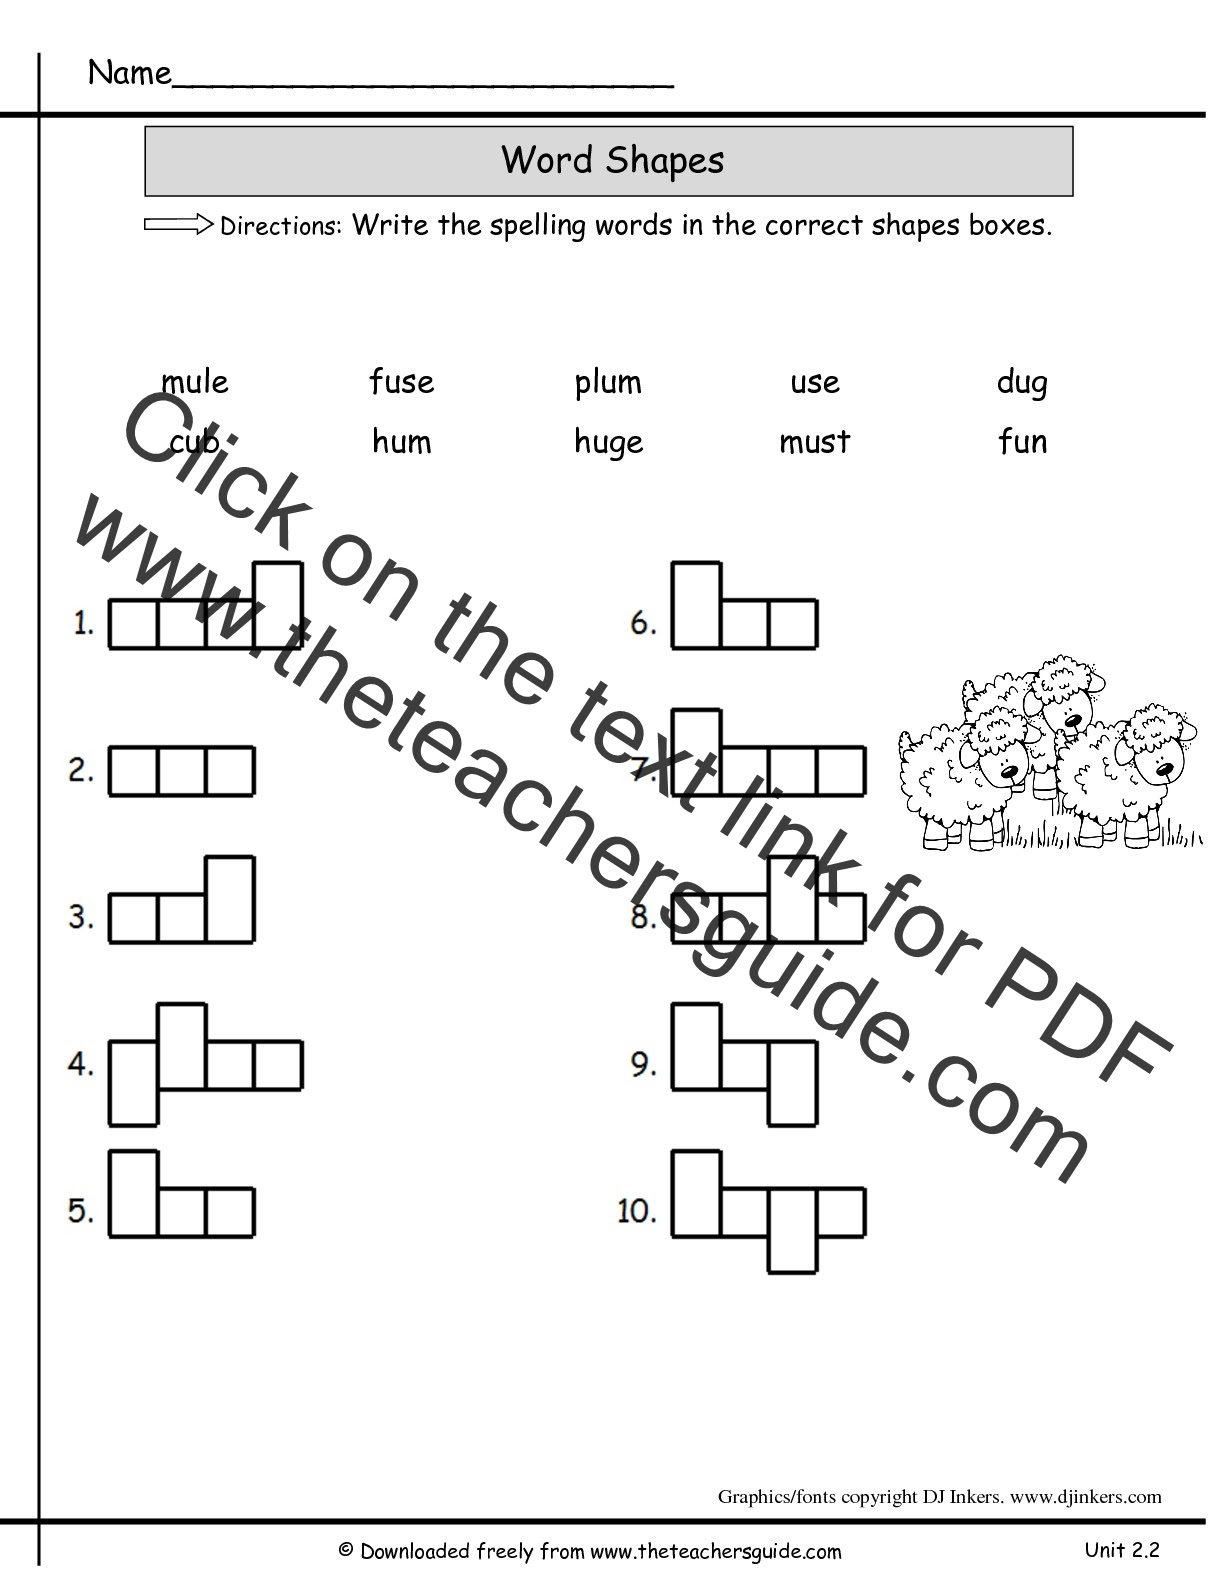 spelling-english-worksheets-for-class-2-2nd-grade-spelling-worksheets-best-coloring-pages